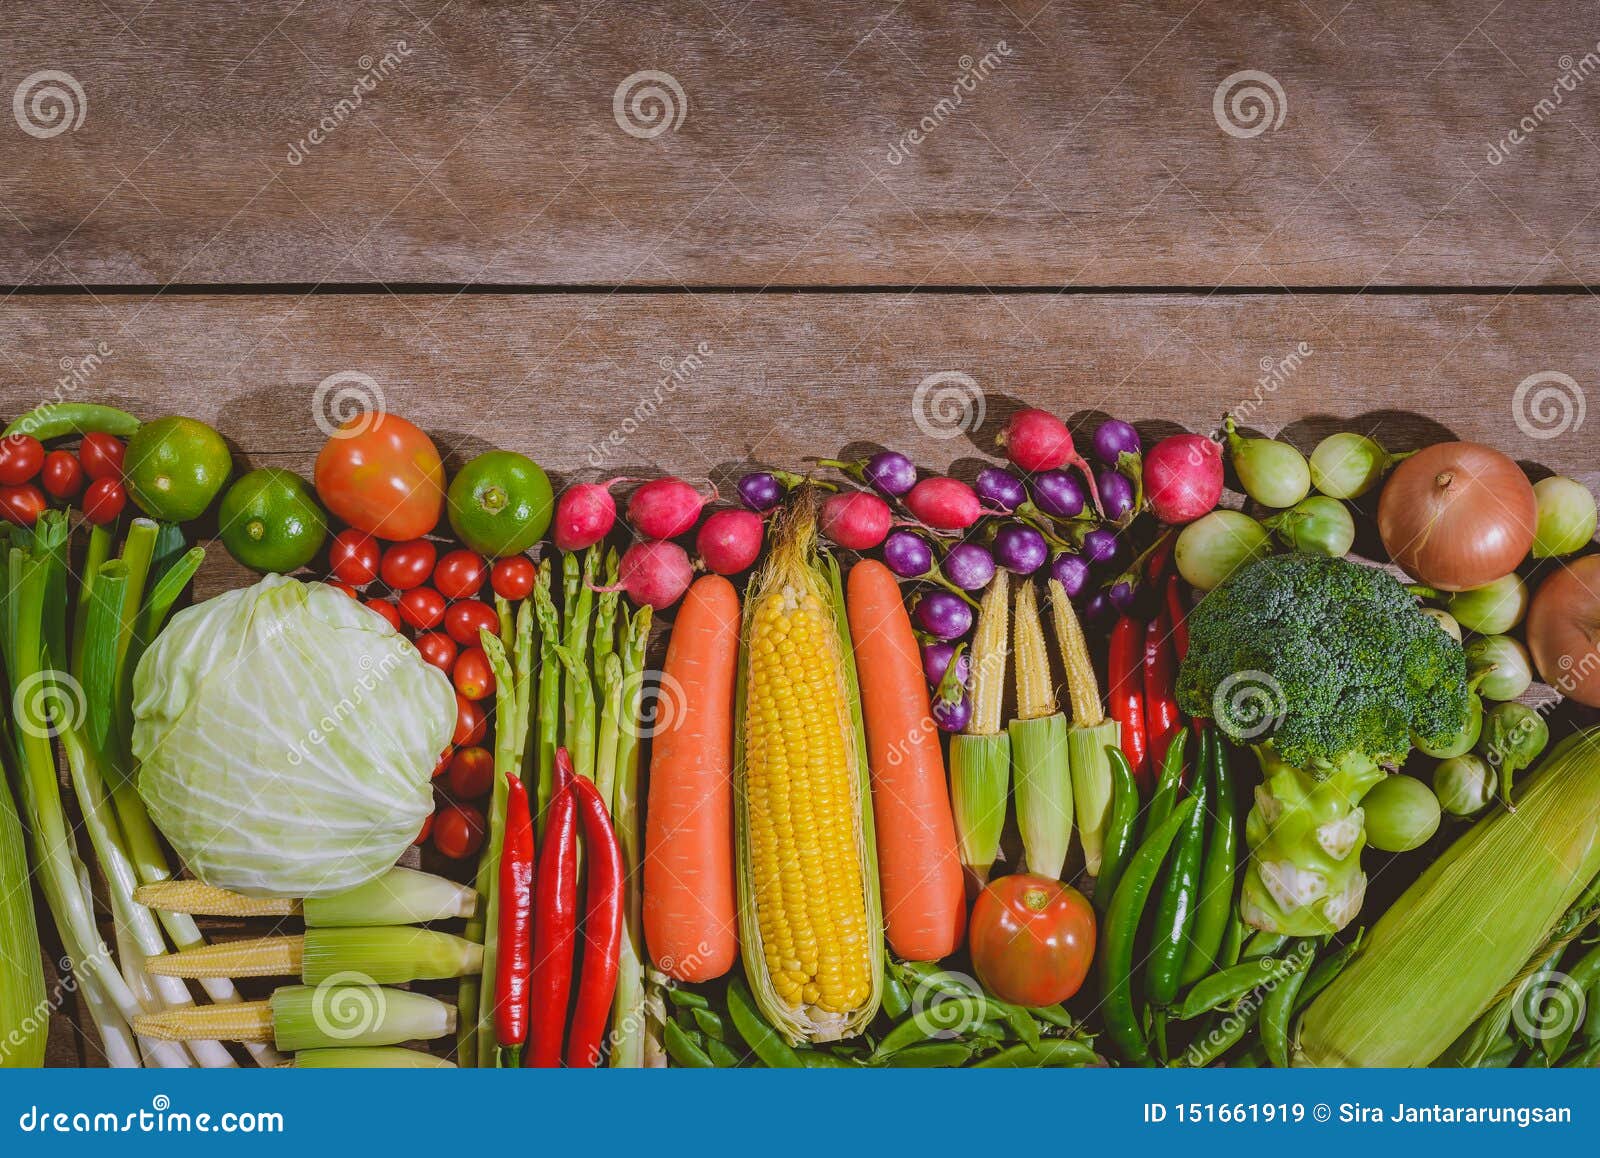 Backgroud of Fresh Food Tasty and Healthy Varis Vegetables are on the ...